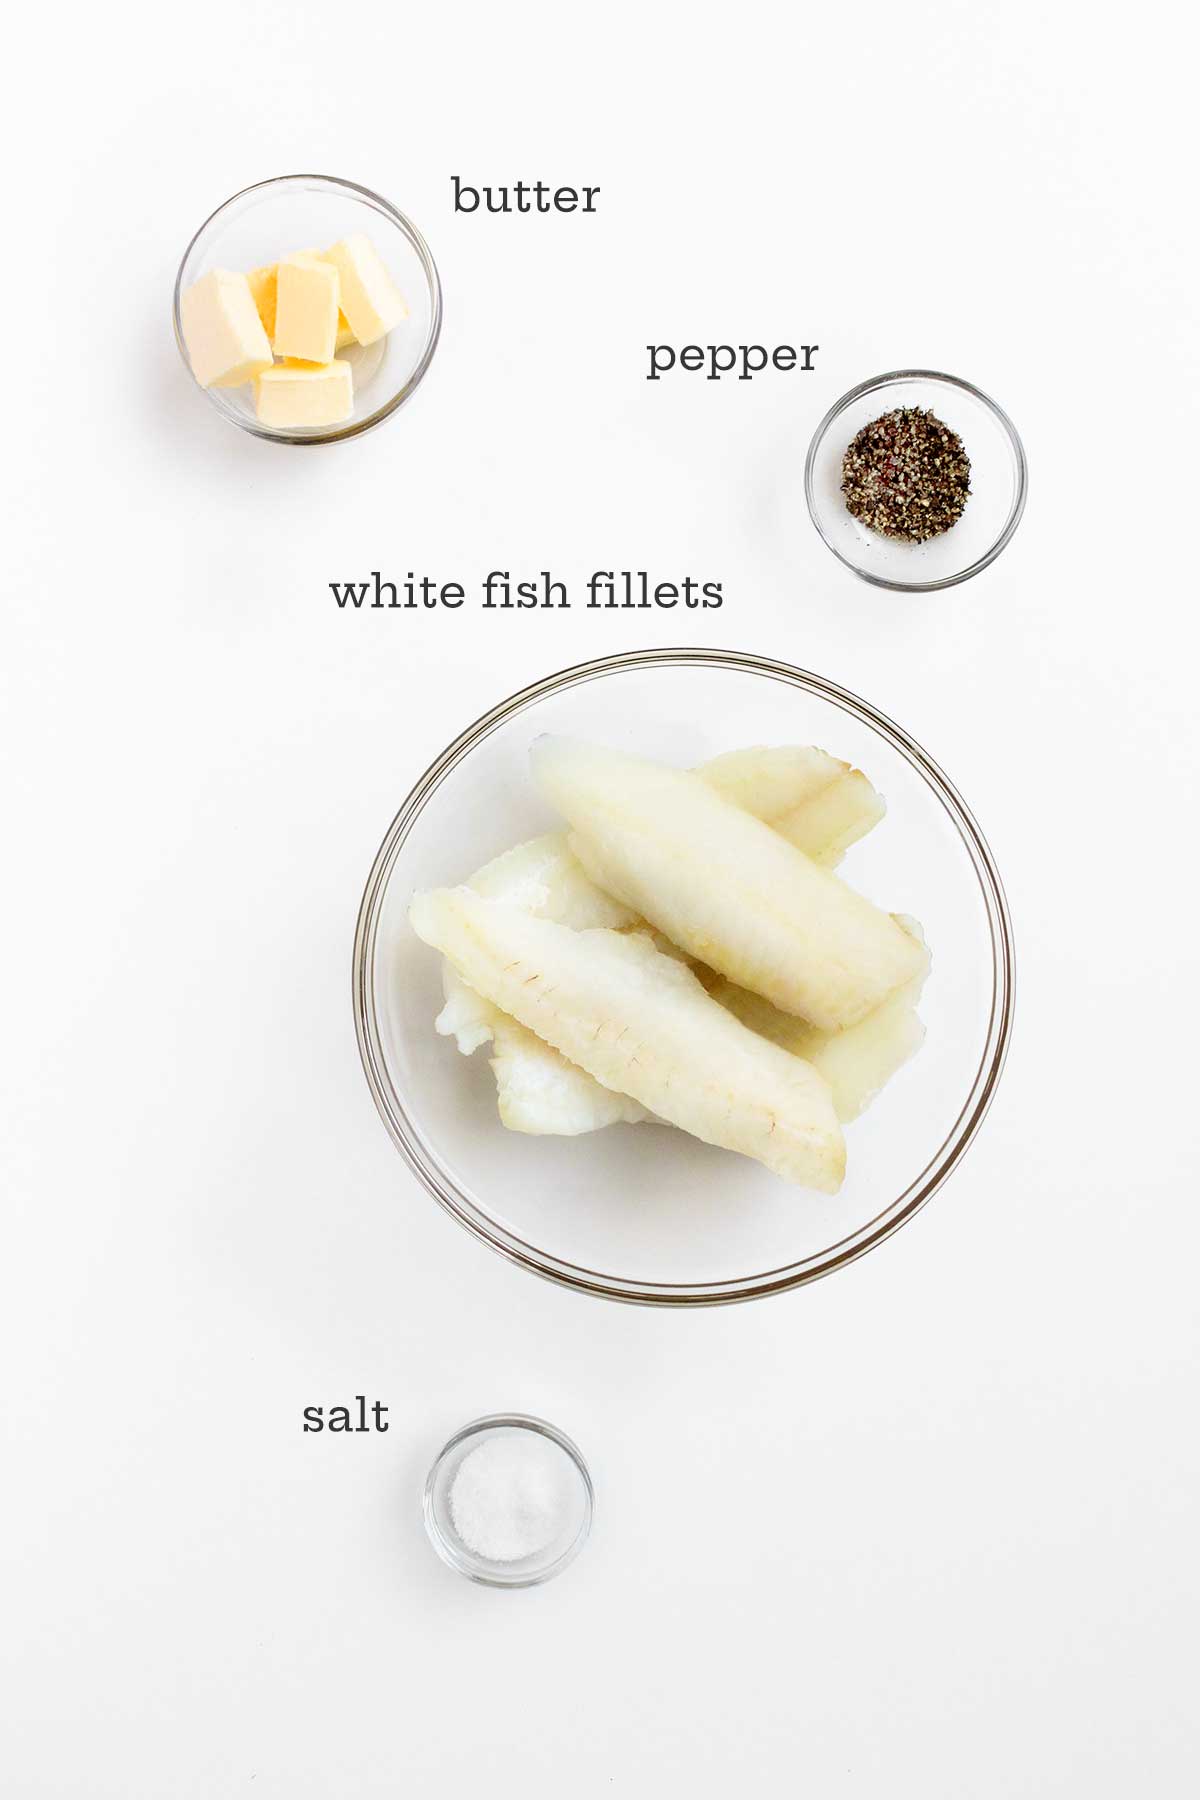 The ingredients for butter baked fish in glass bowls -- butter, pepper, fish fillets, and salt.